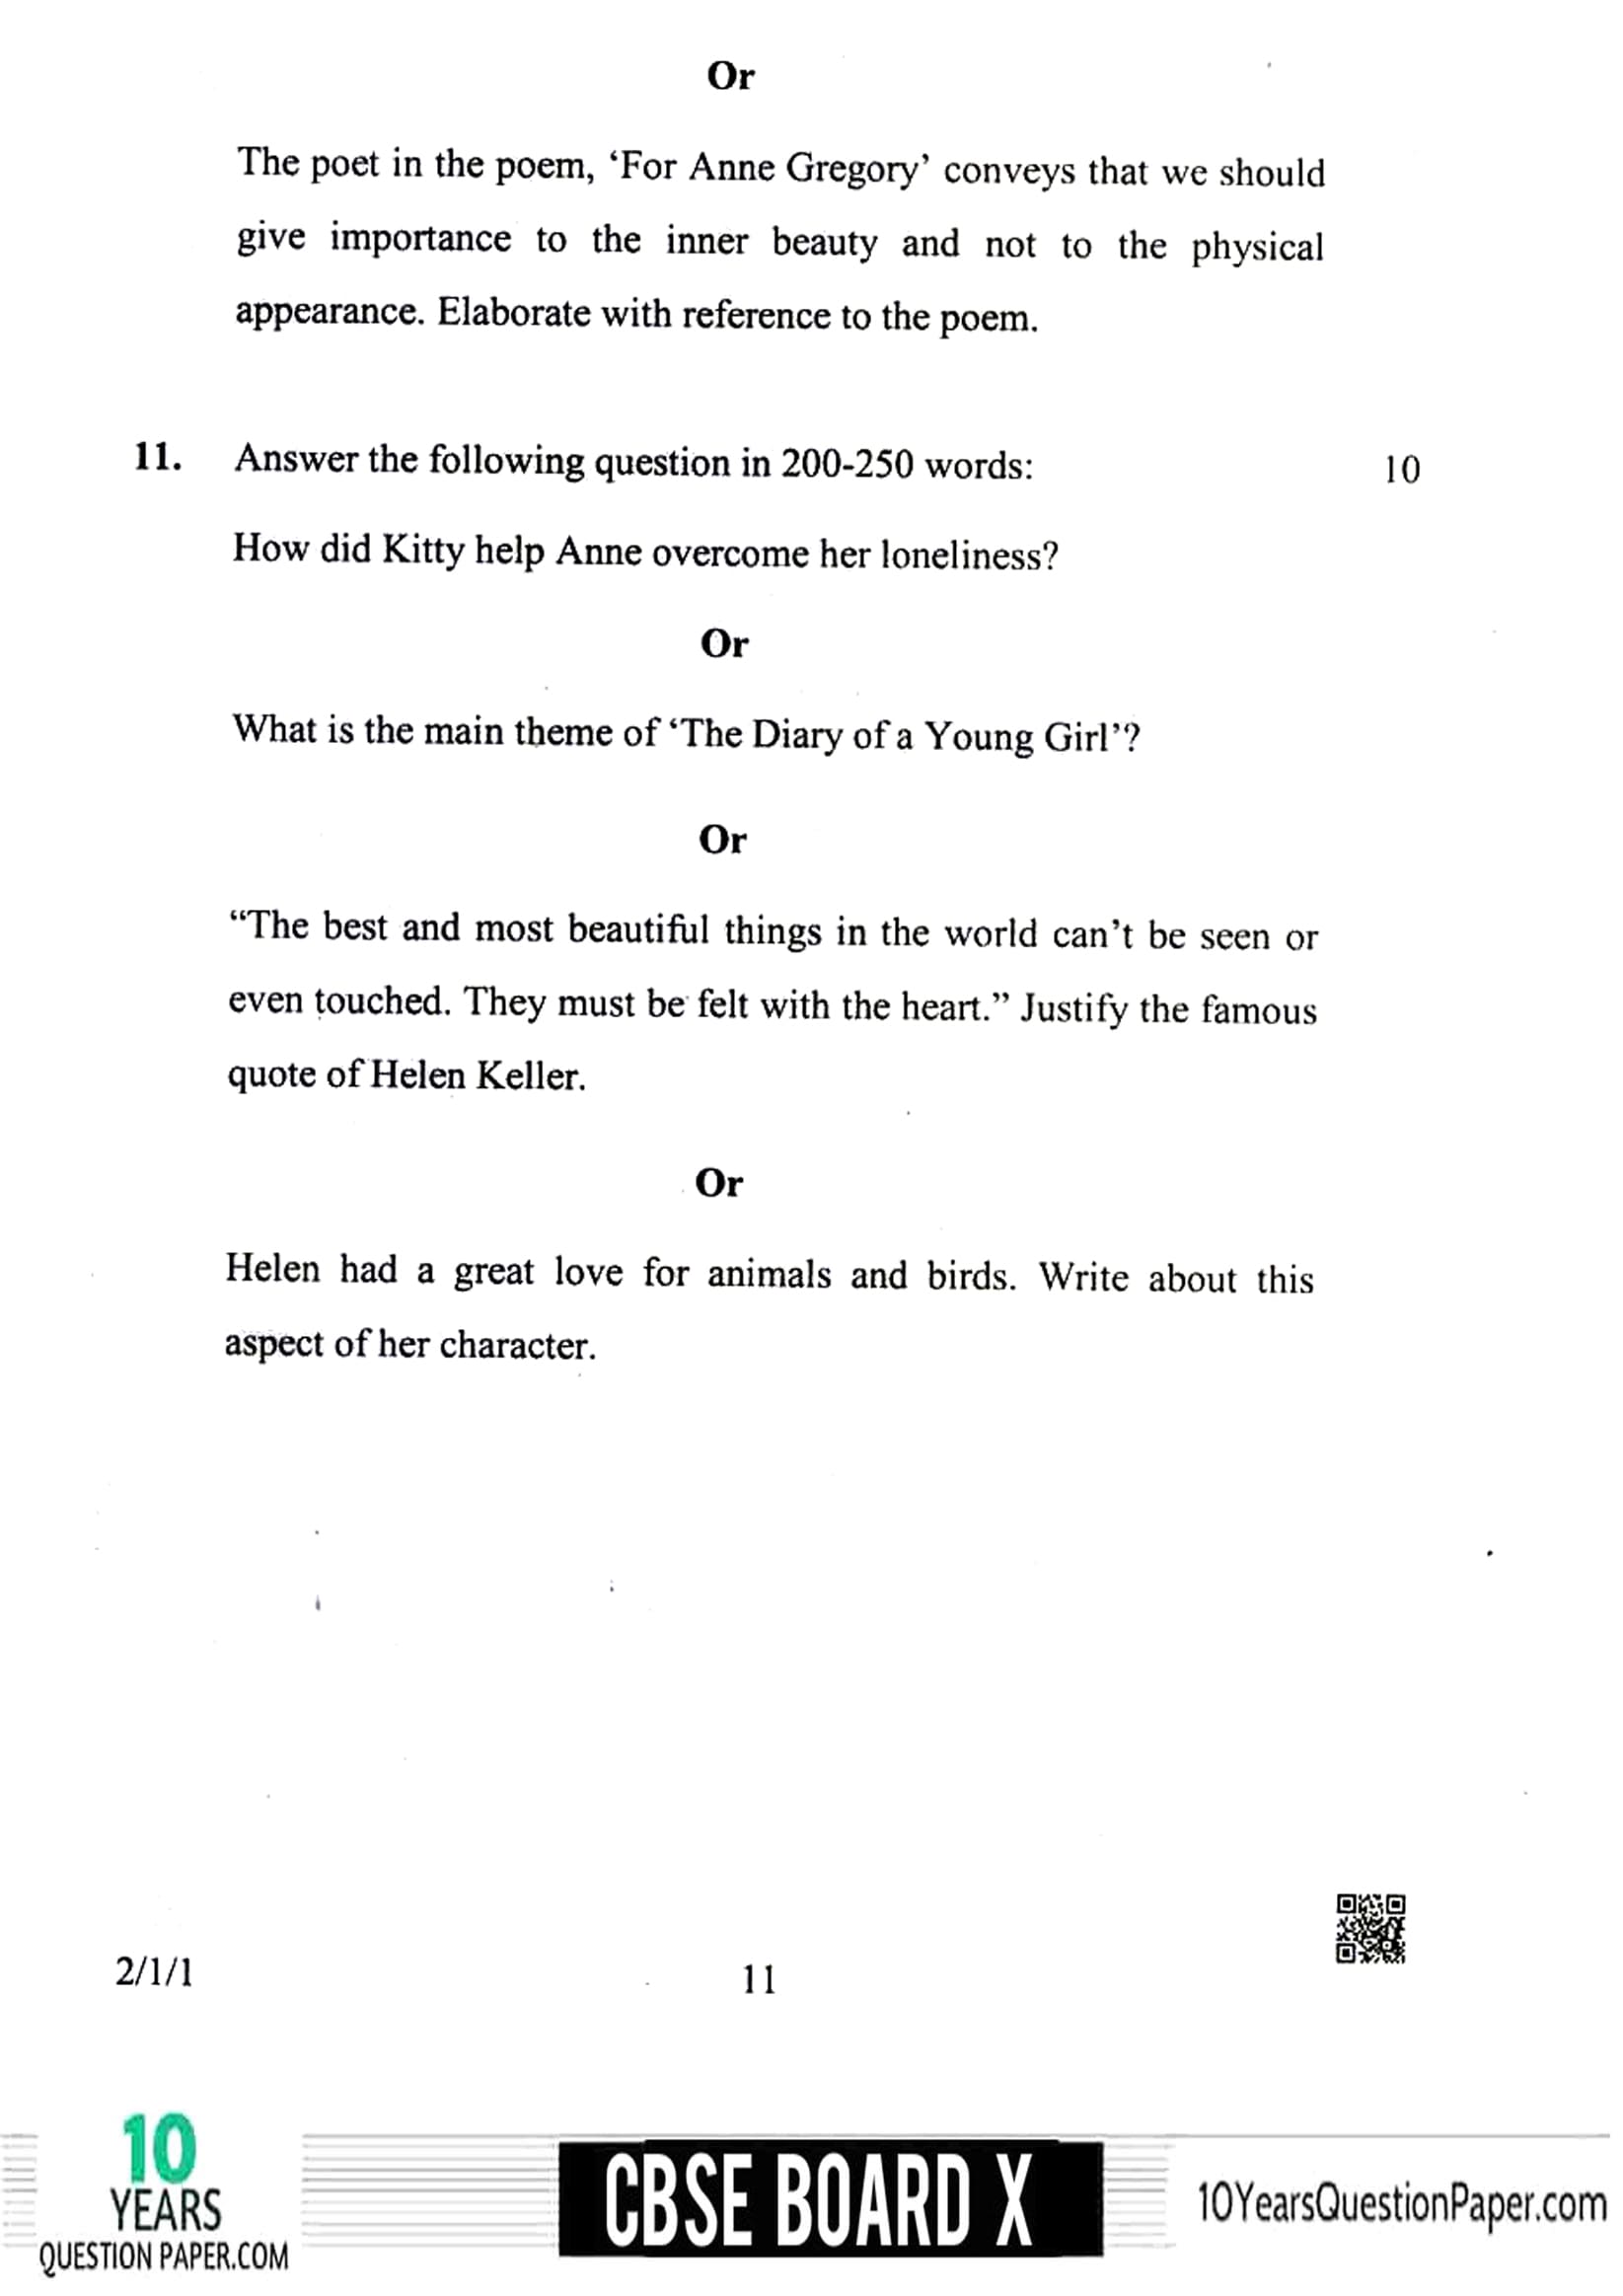 CBSE Class 10 English (Language And Literature) 2019 Question Paper